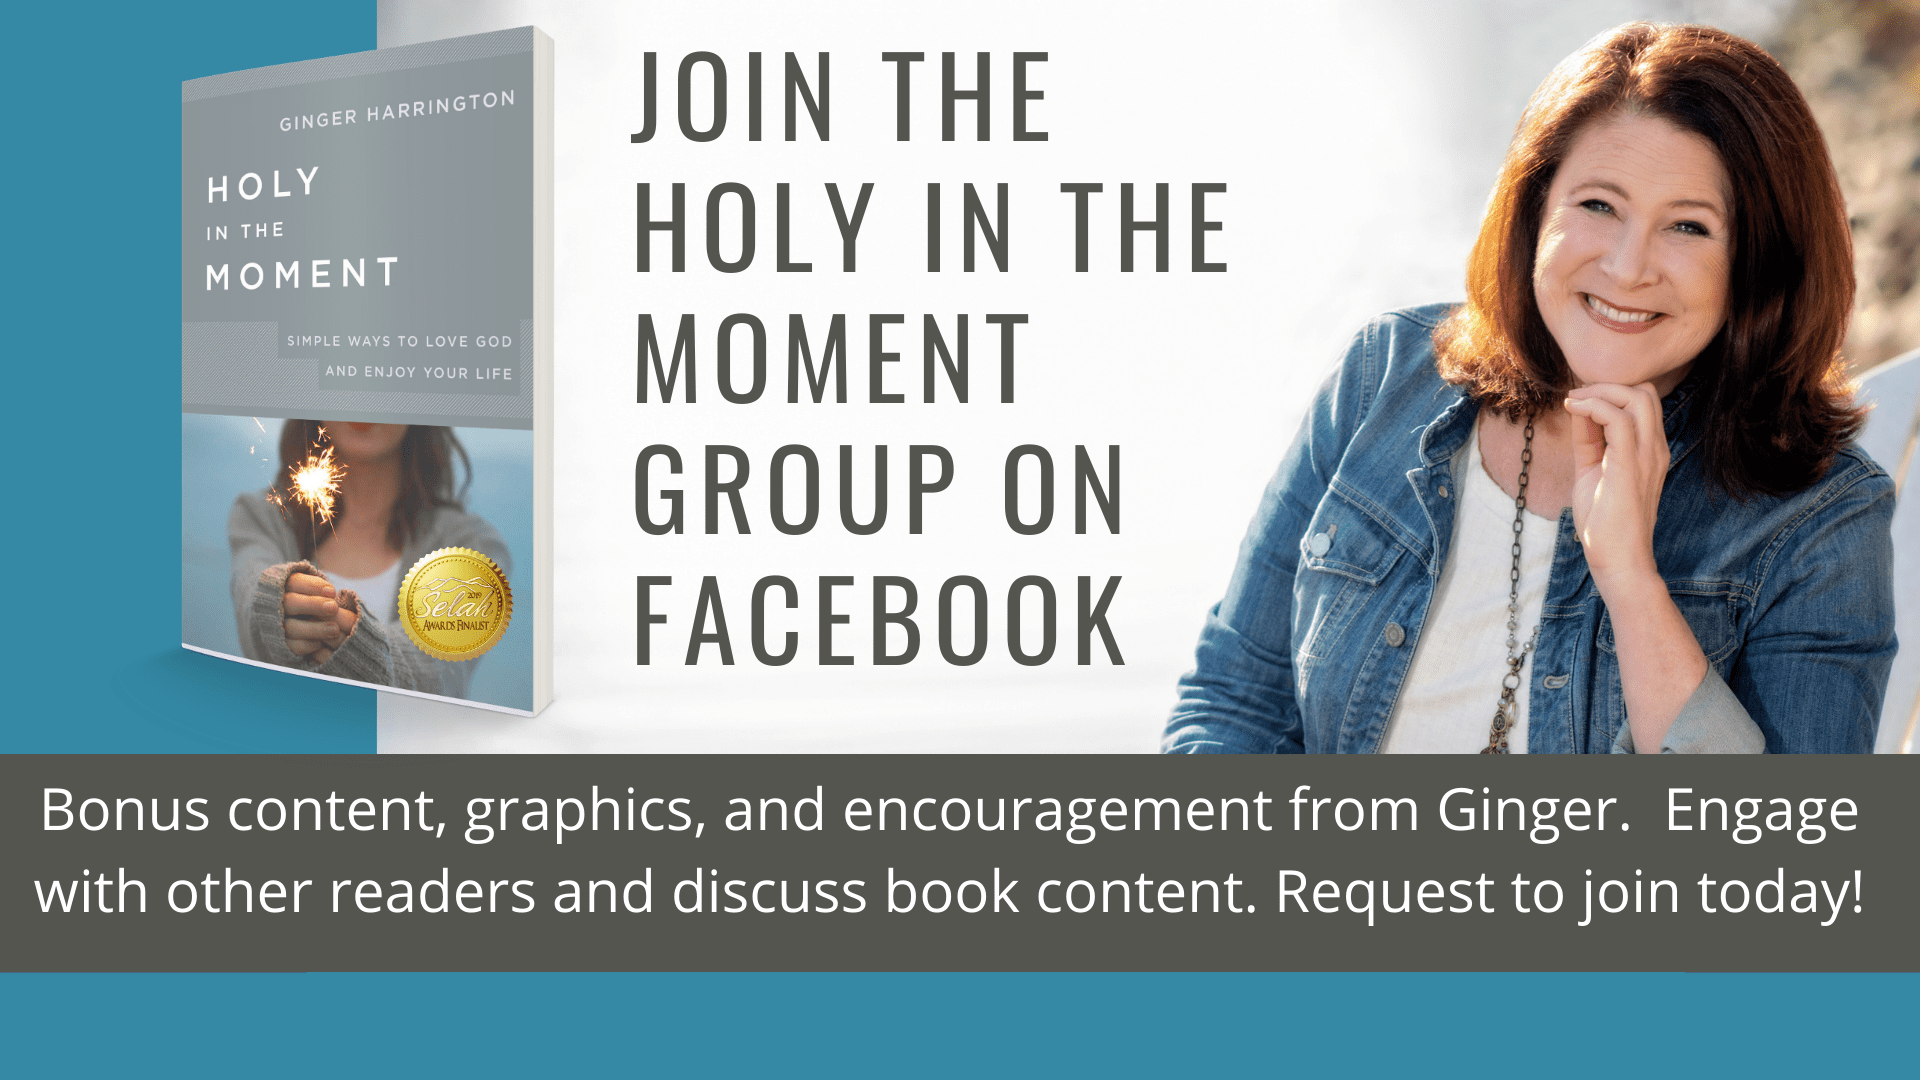 Join the Holy in the Moment Community on Facebook to practice simple ways and holy habits for a deeper relationship with God, others, and yourself.